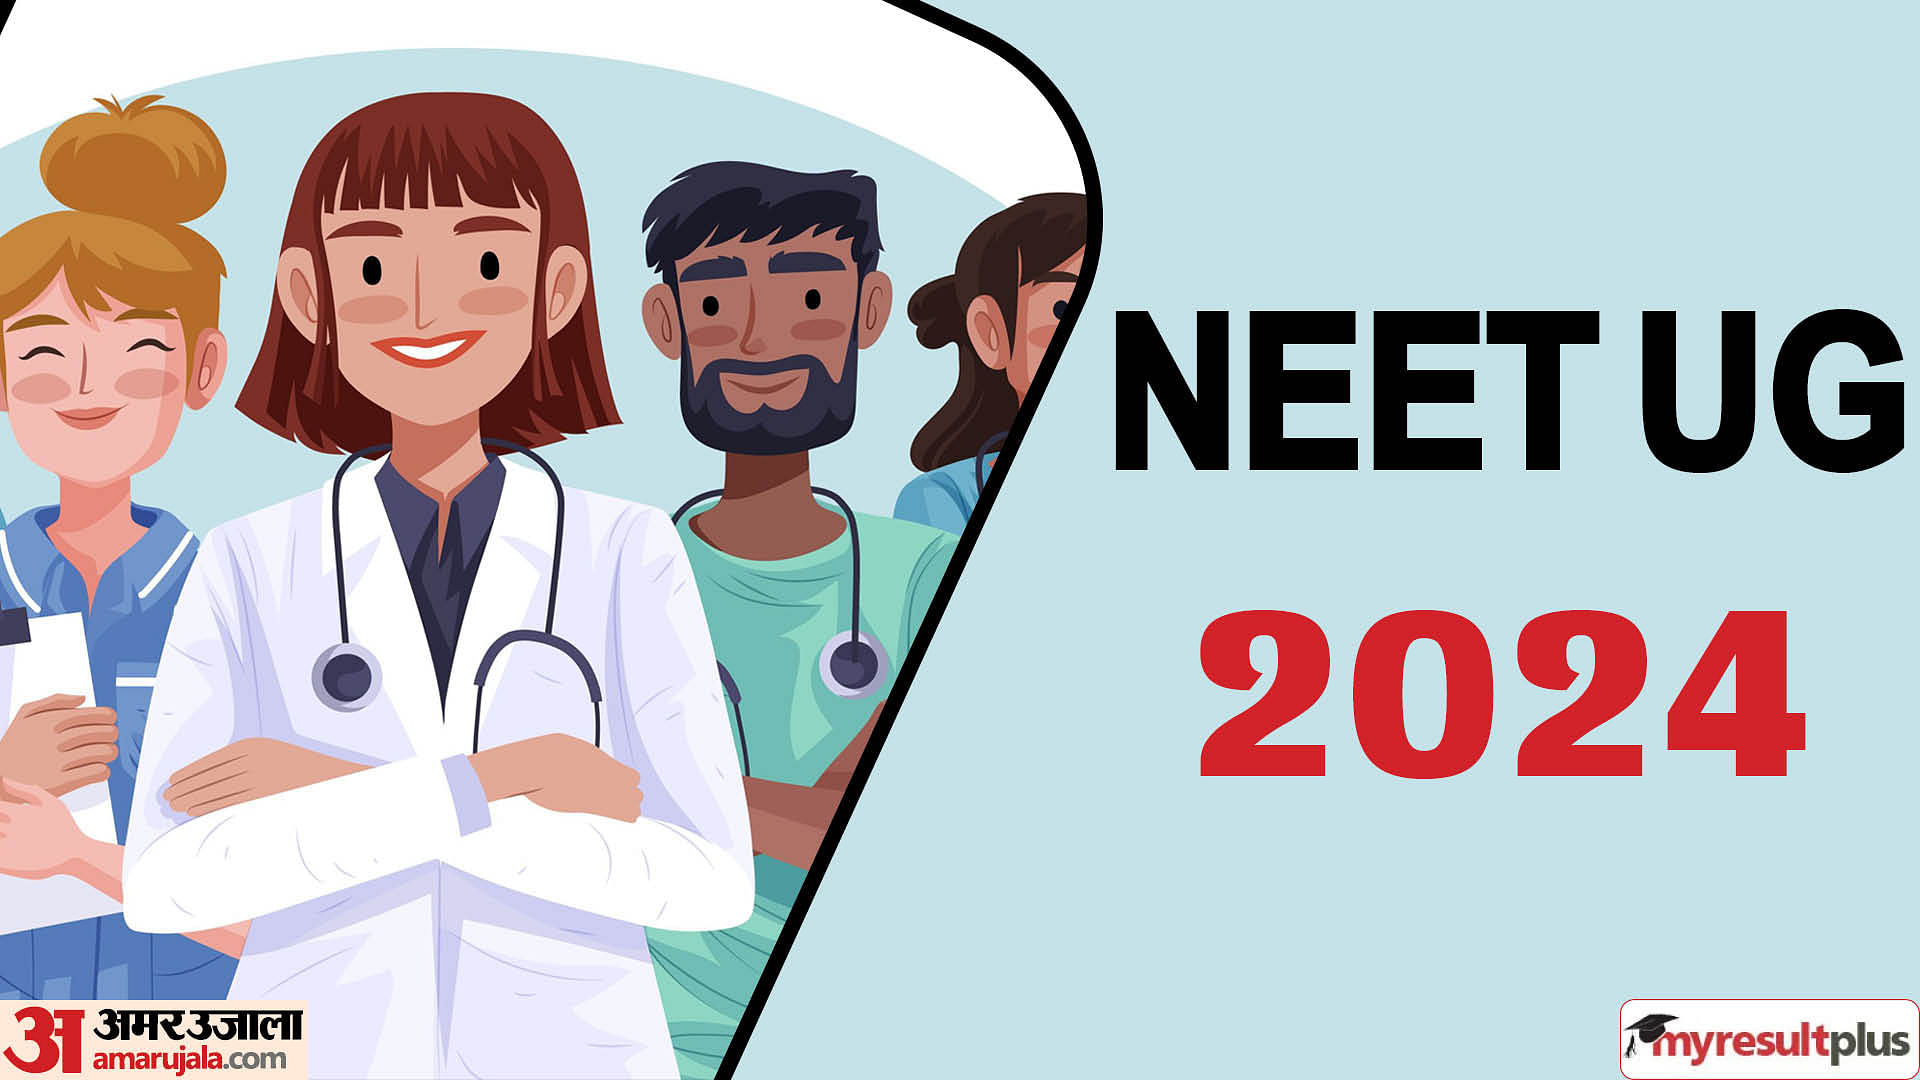 NEET UG 2024 Exam tomorrow, Read about the important guidelines, dress code and bio break rules here